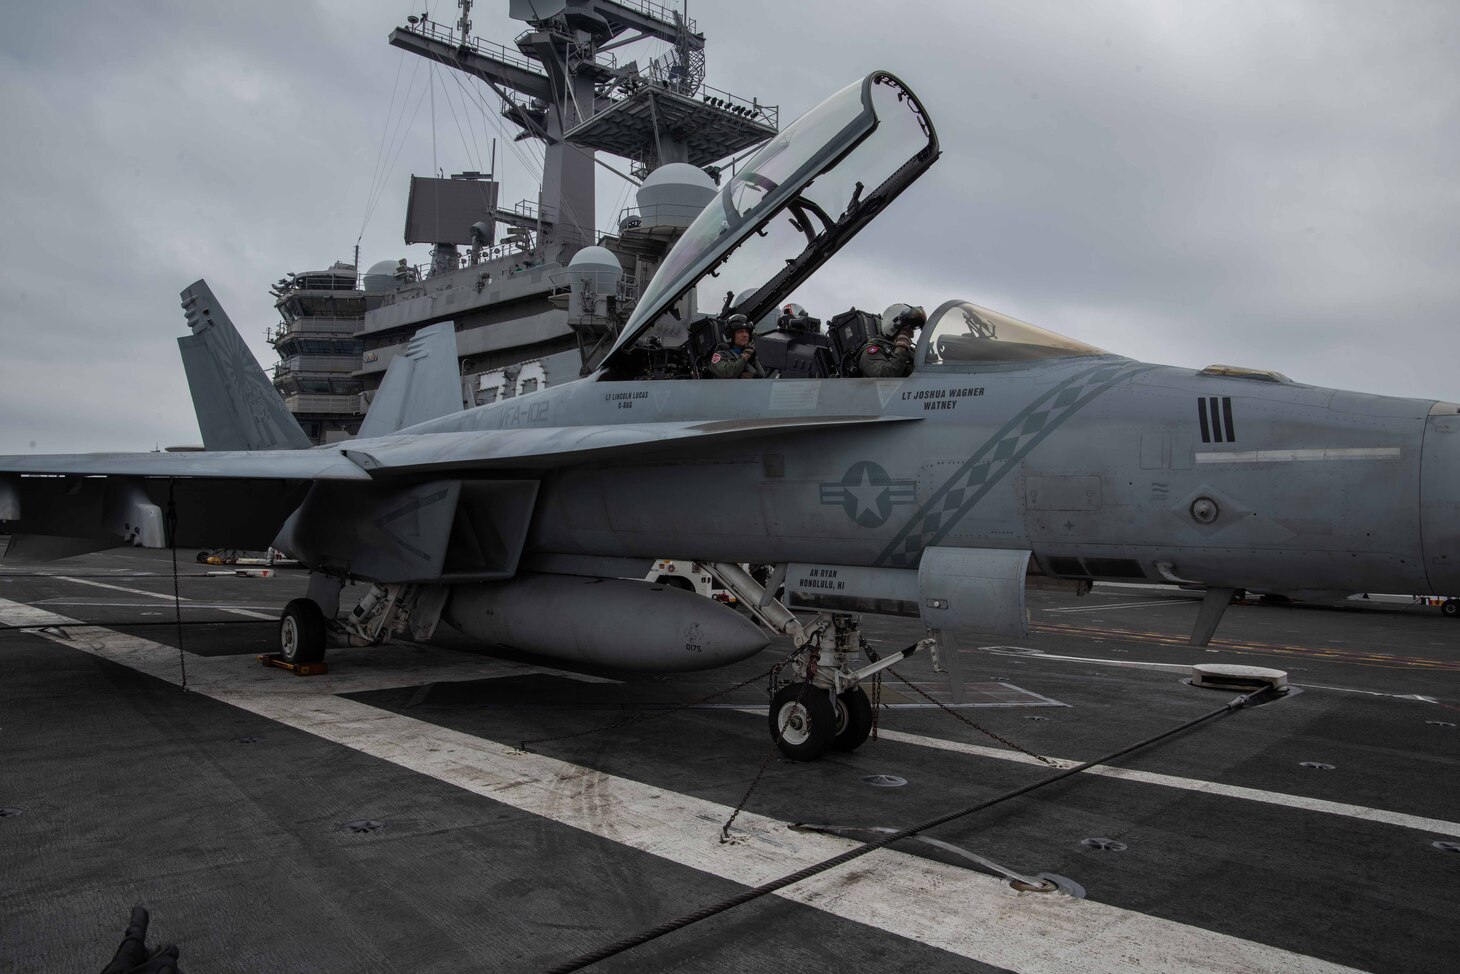 PHILIPPINE SEA (May 30, 2020) Commander, U.S. 7th Fleet, Vice Adm. William R. Merz conducts pre-flight checks on an F/A-18F Super Hornet attached to Strike Fighter Squadron (VFA) 102 on the flight deck of the Navy’s only forward-deployed aircraft carrier USS Ronald Reagan (CVN 76) during a scheduled visit. During the visit, Merz talked with Sailors about the health of the force and observed the ship’s operational readiness. Ronald Reagan, the flagship of Carrier Strike Group 5, provides a combat-ready force that protects and defends the United States, as well as the collective maritime interests of its allies and partners in the Indo-Pacific region. (U.S Navy photo by Mass Communication Specialist 2nd Class Samantha Jetzer)